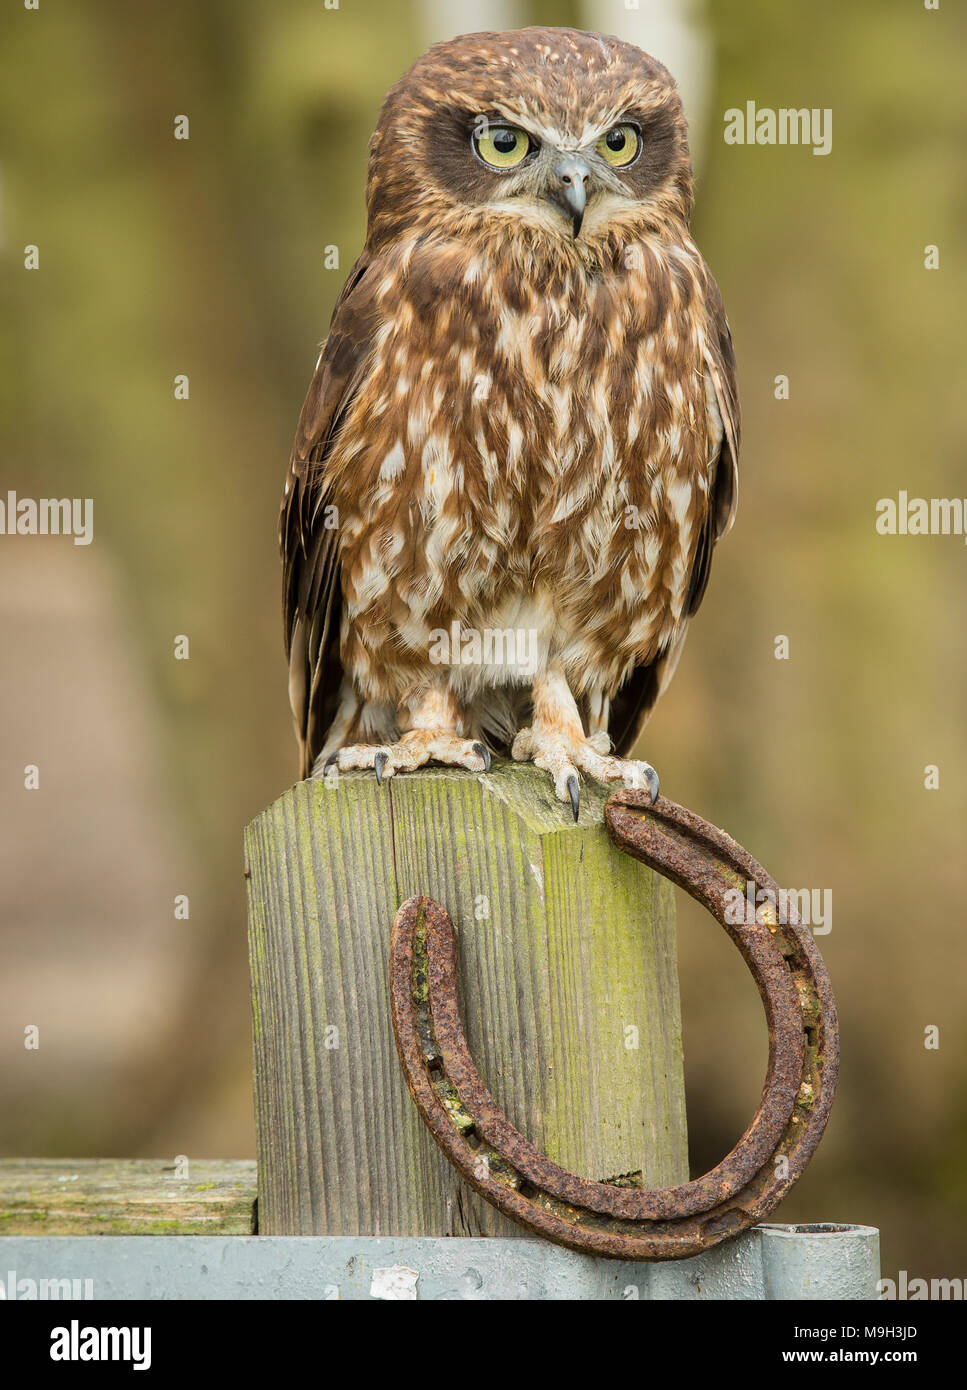 Boobook Owl, a native of Australia, this brown owl is perched on a farm gate post with lucky horse shoe.  Facing forward.  Portrait Stock Photo